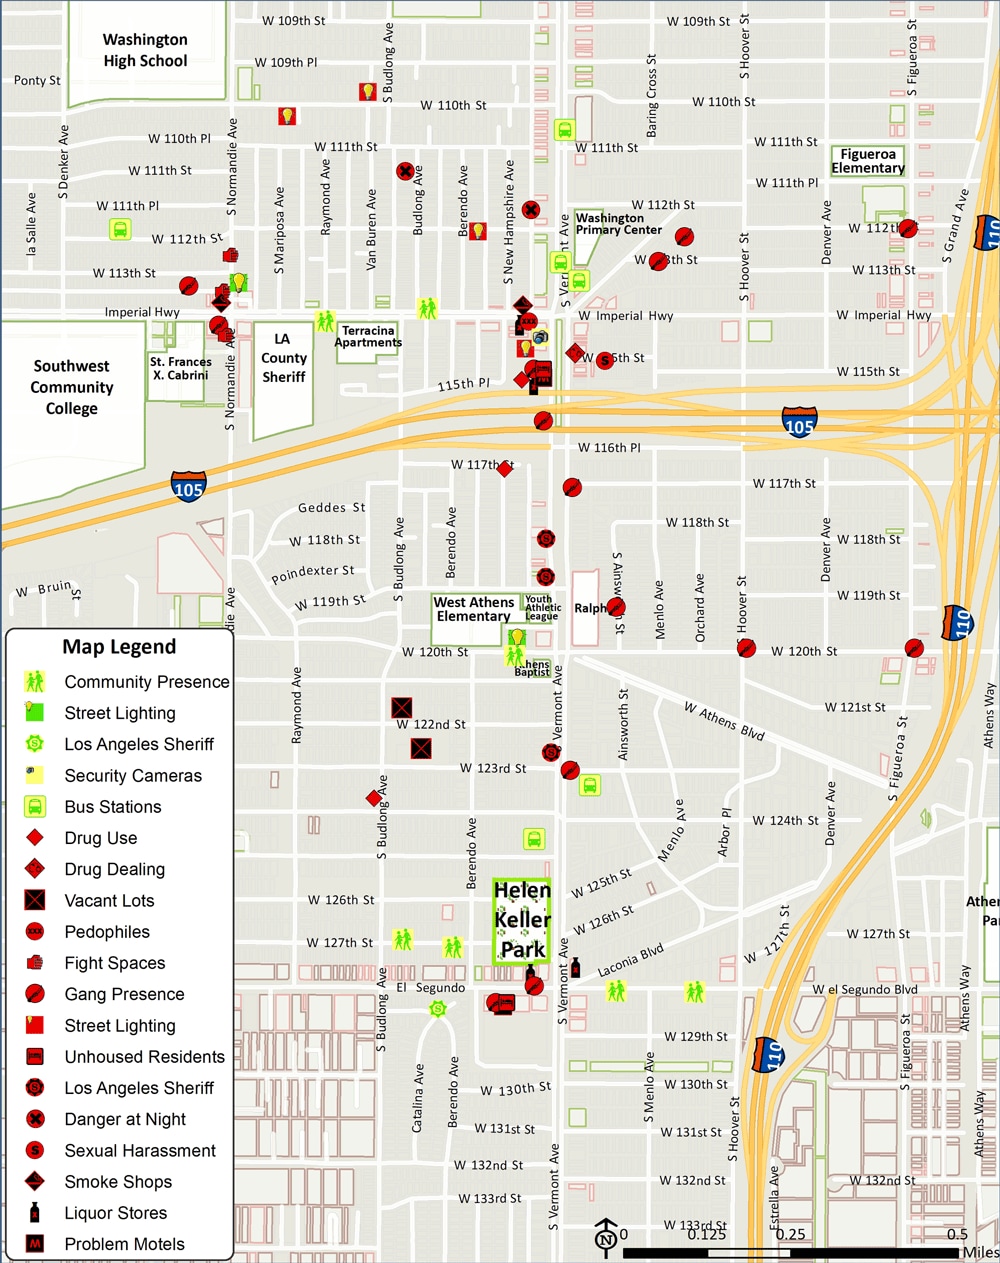 Digitized participatory geographic information systems map of community park access assets and challenges, South Los Angeles, 2015.